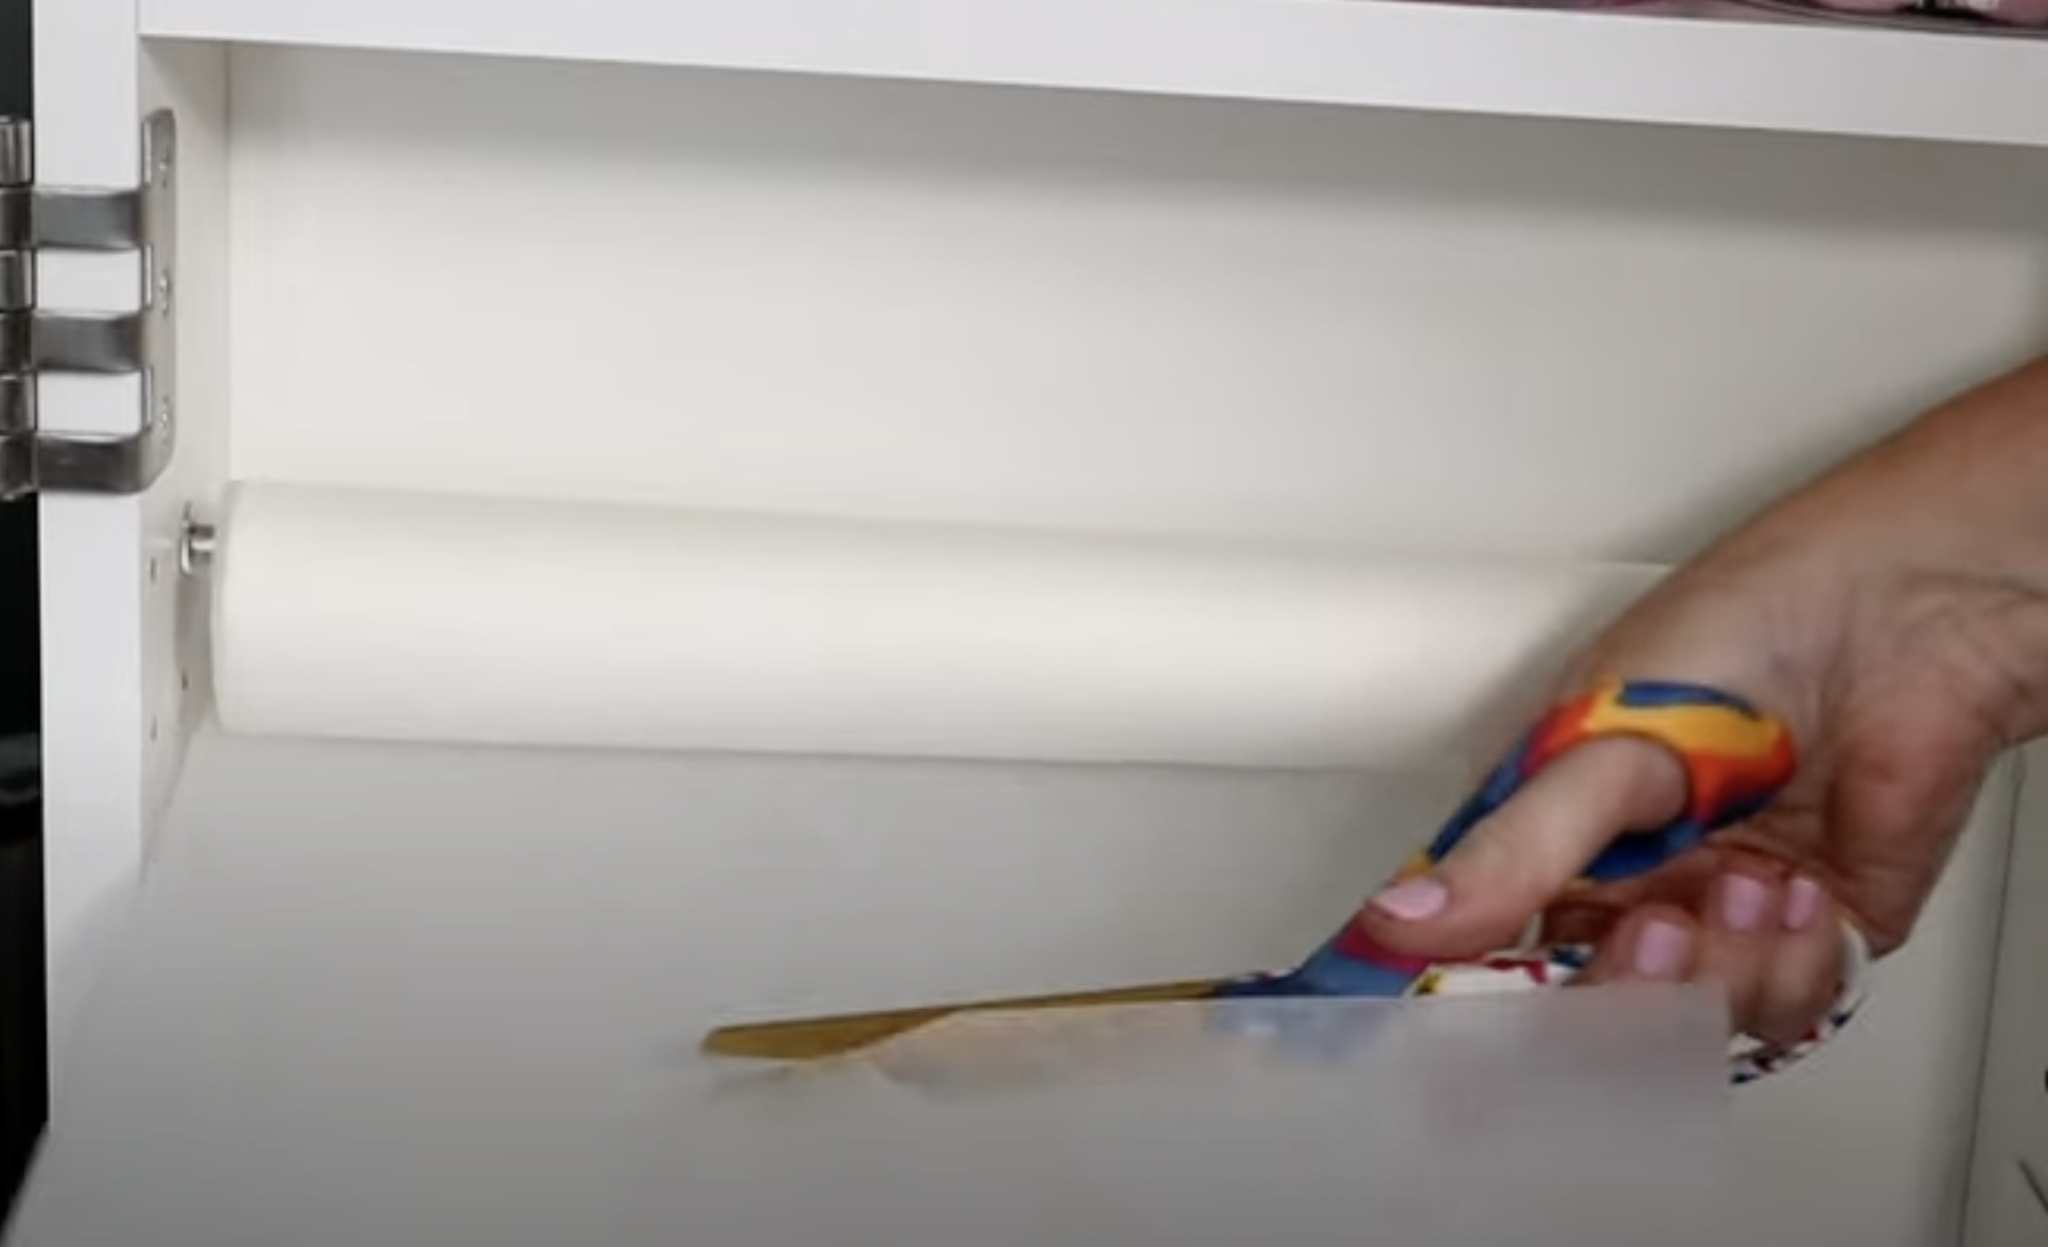 Use scissors to trim sublimation protective paper from roll.